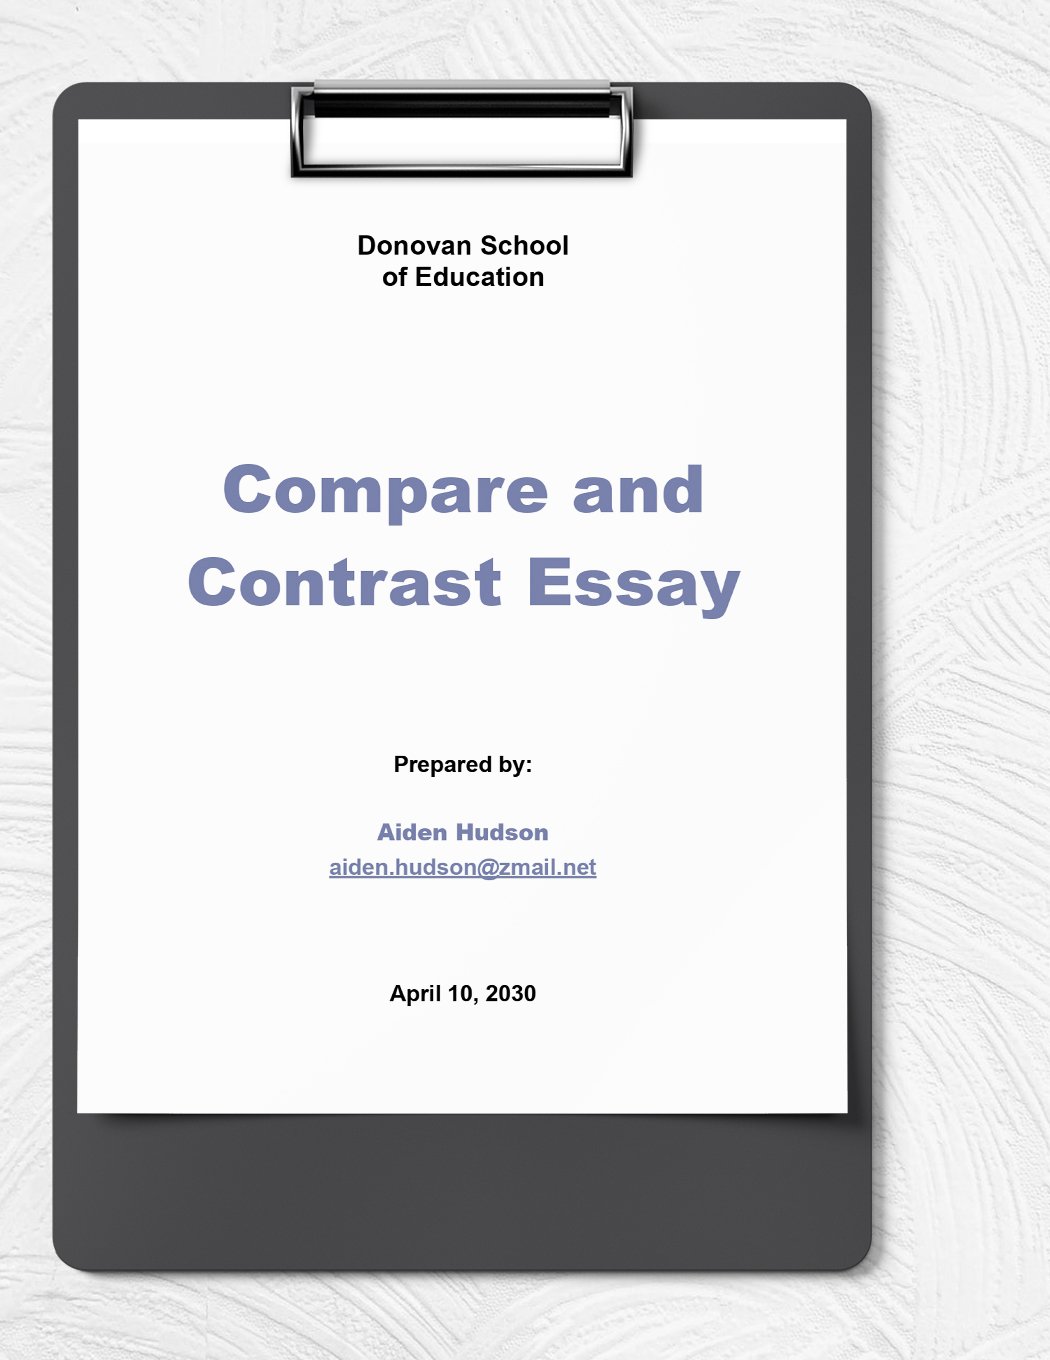 Compare and Contrast Essay Template in Word, Google Docs